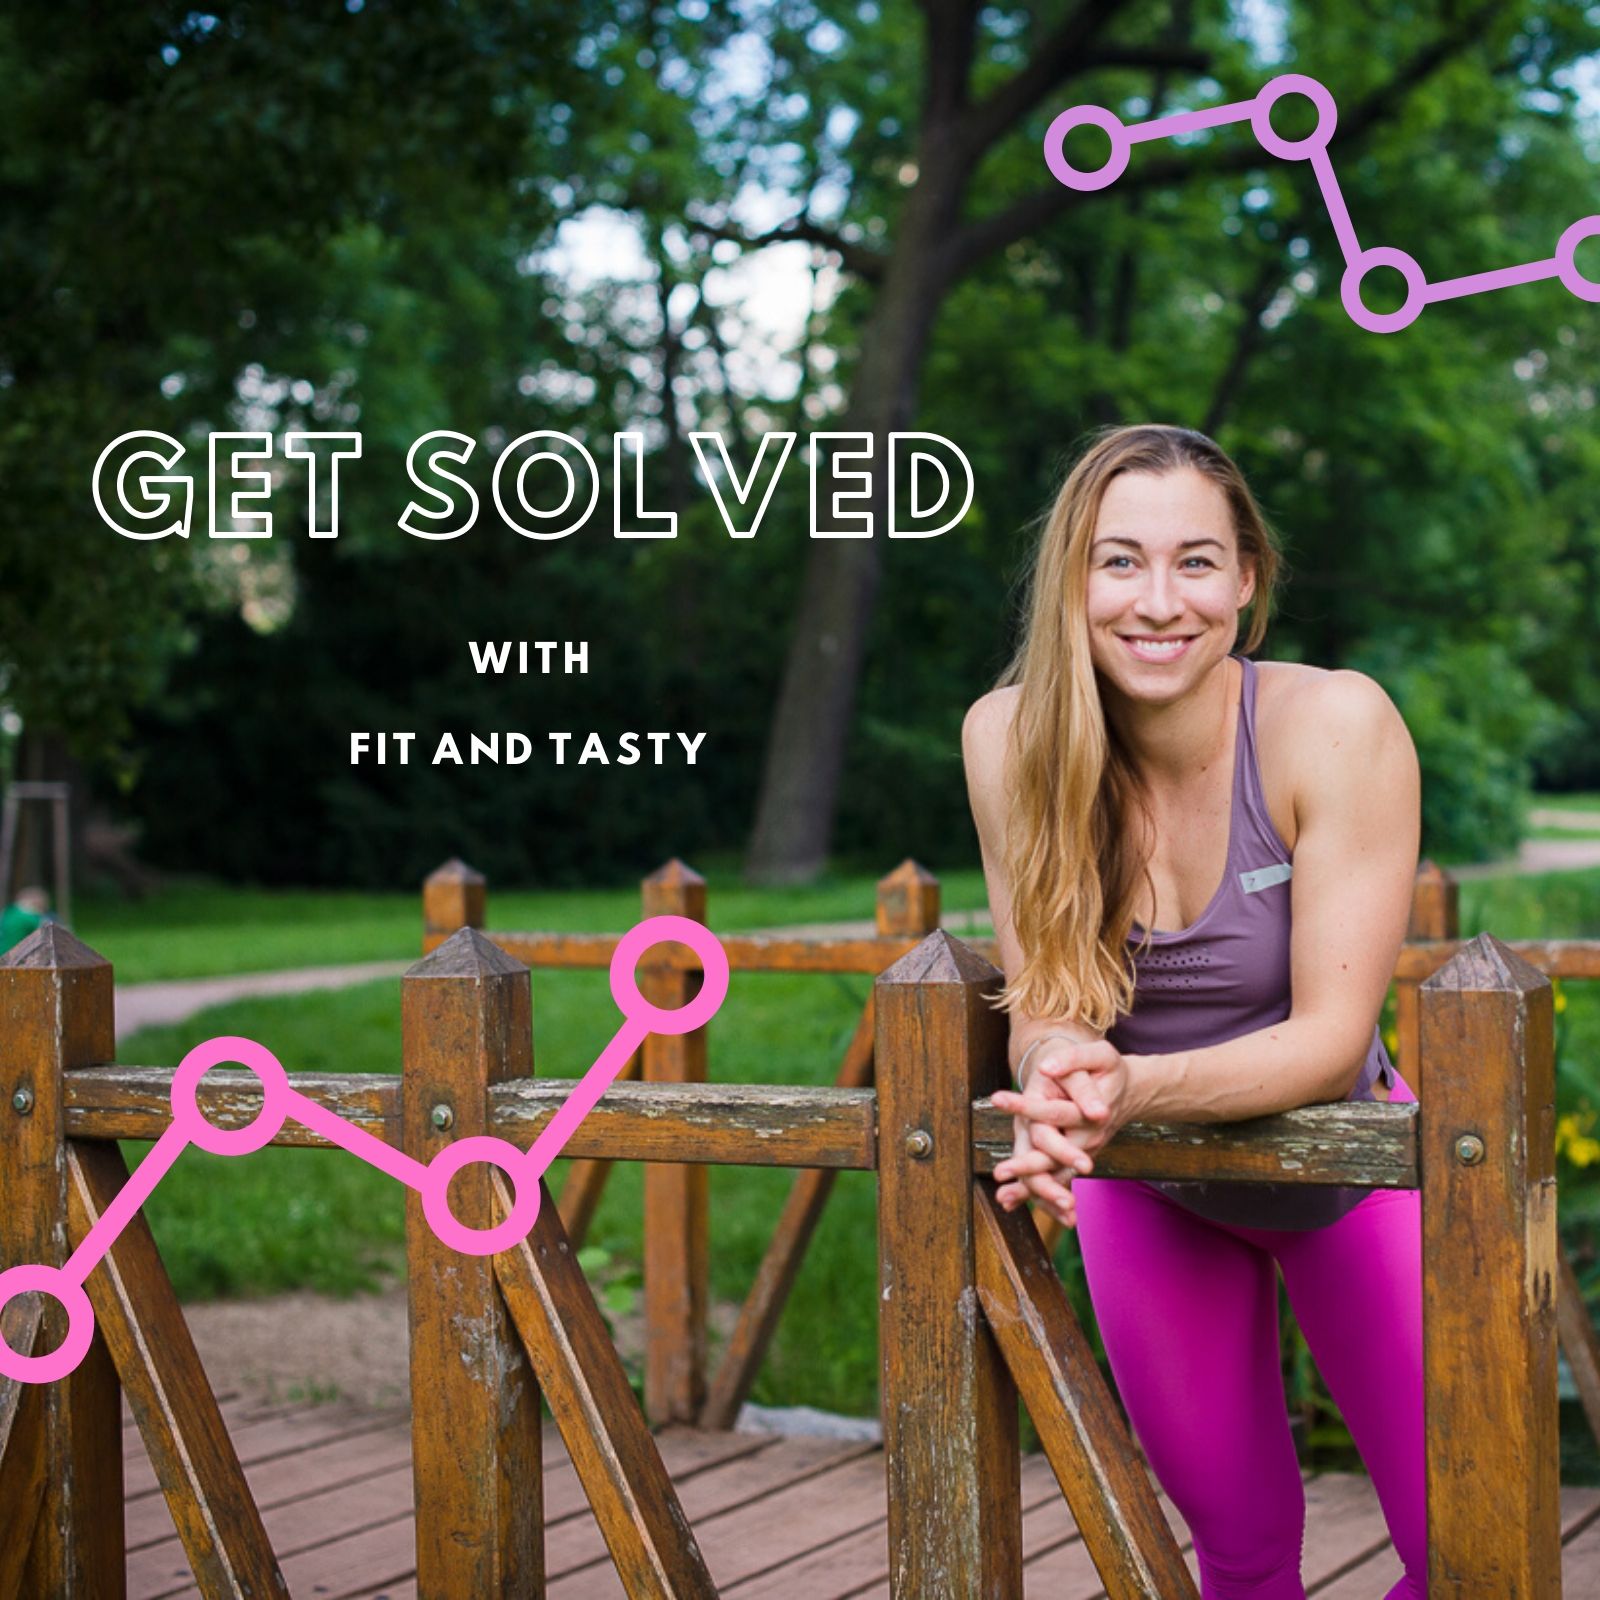 Get Solved with Fit and Tasty